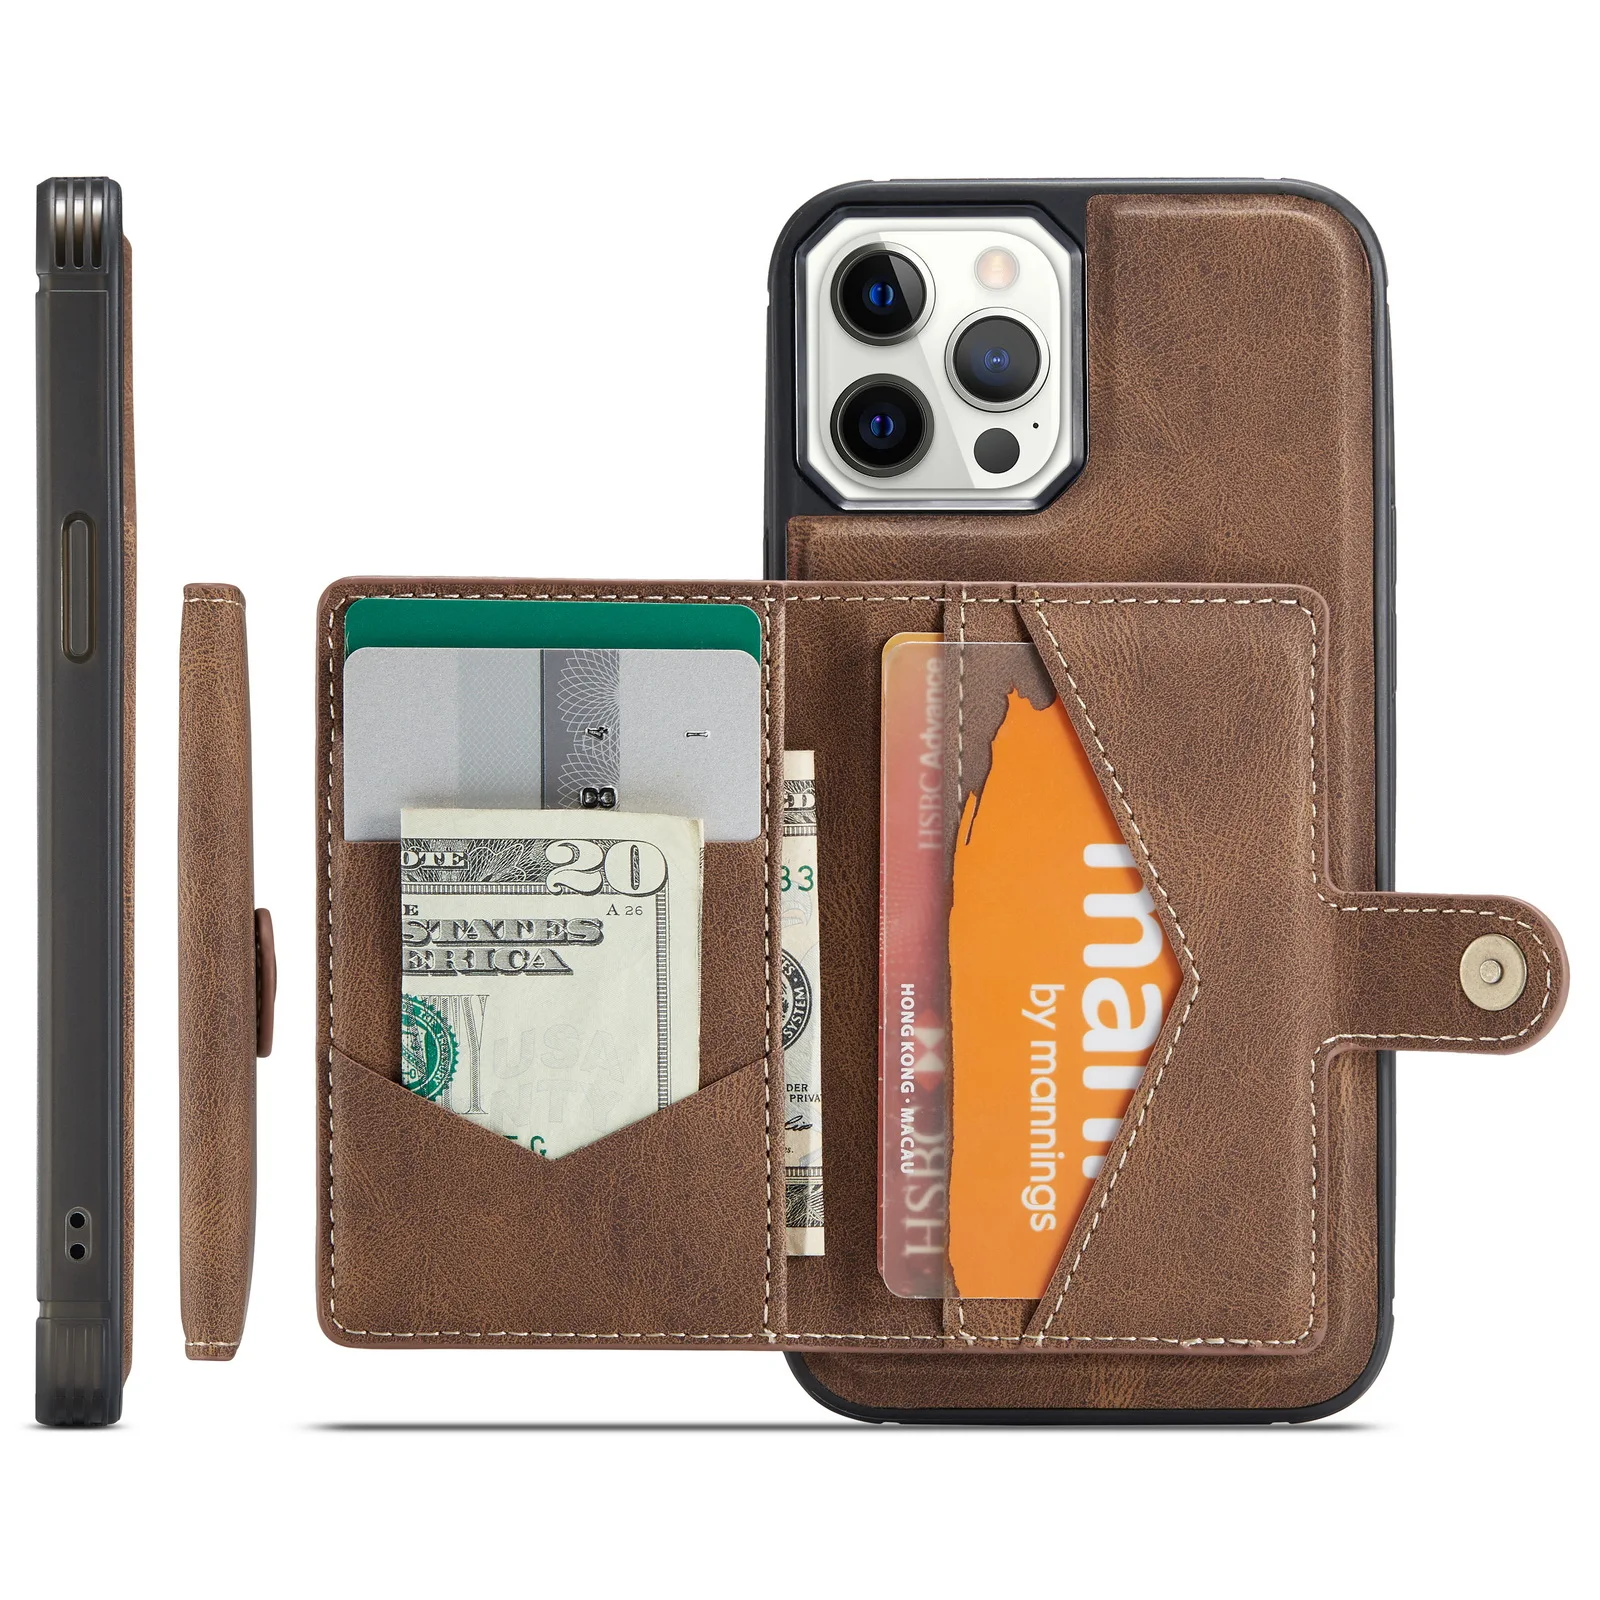 Support Magsafe Charger] iPhone 12 Pro Max Wallet Case